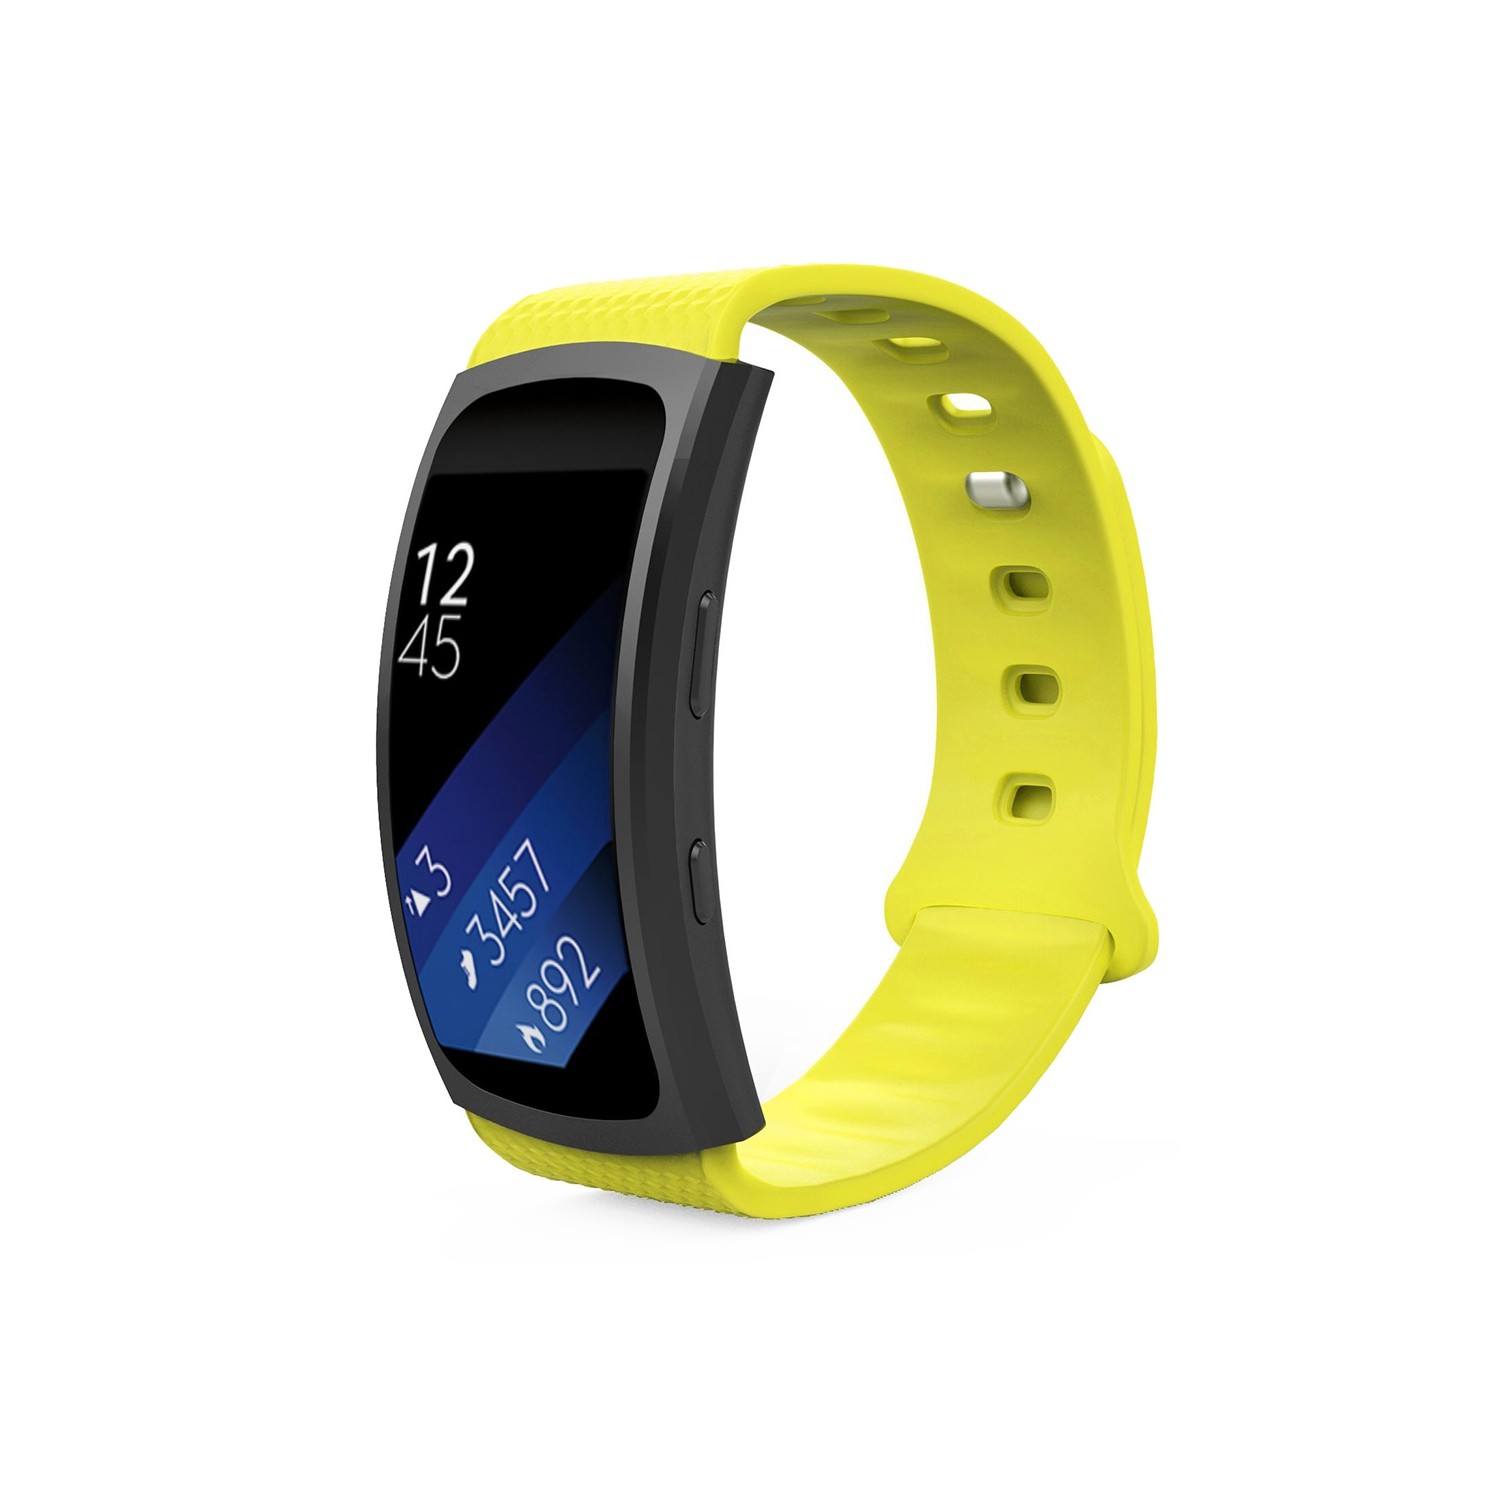 StrapsCo Silicone Medium-Long Length Sport Strap For Samsung Gear Fit 2 SM R360 in Yellow